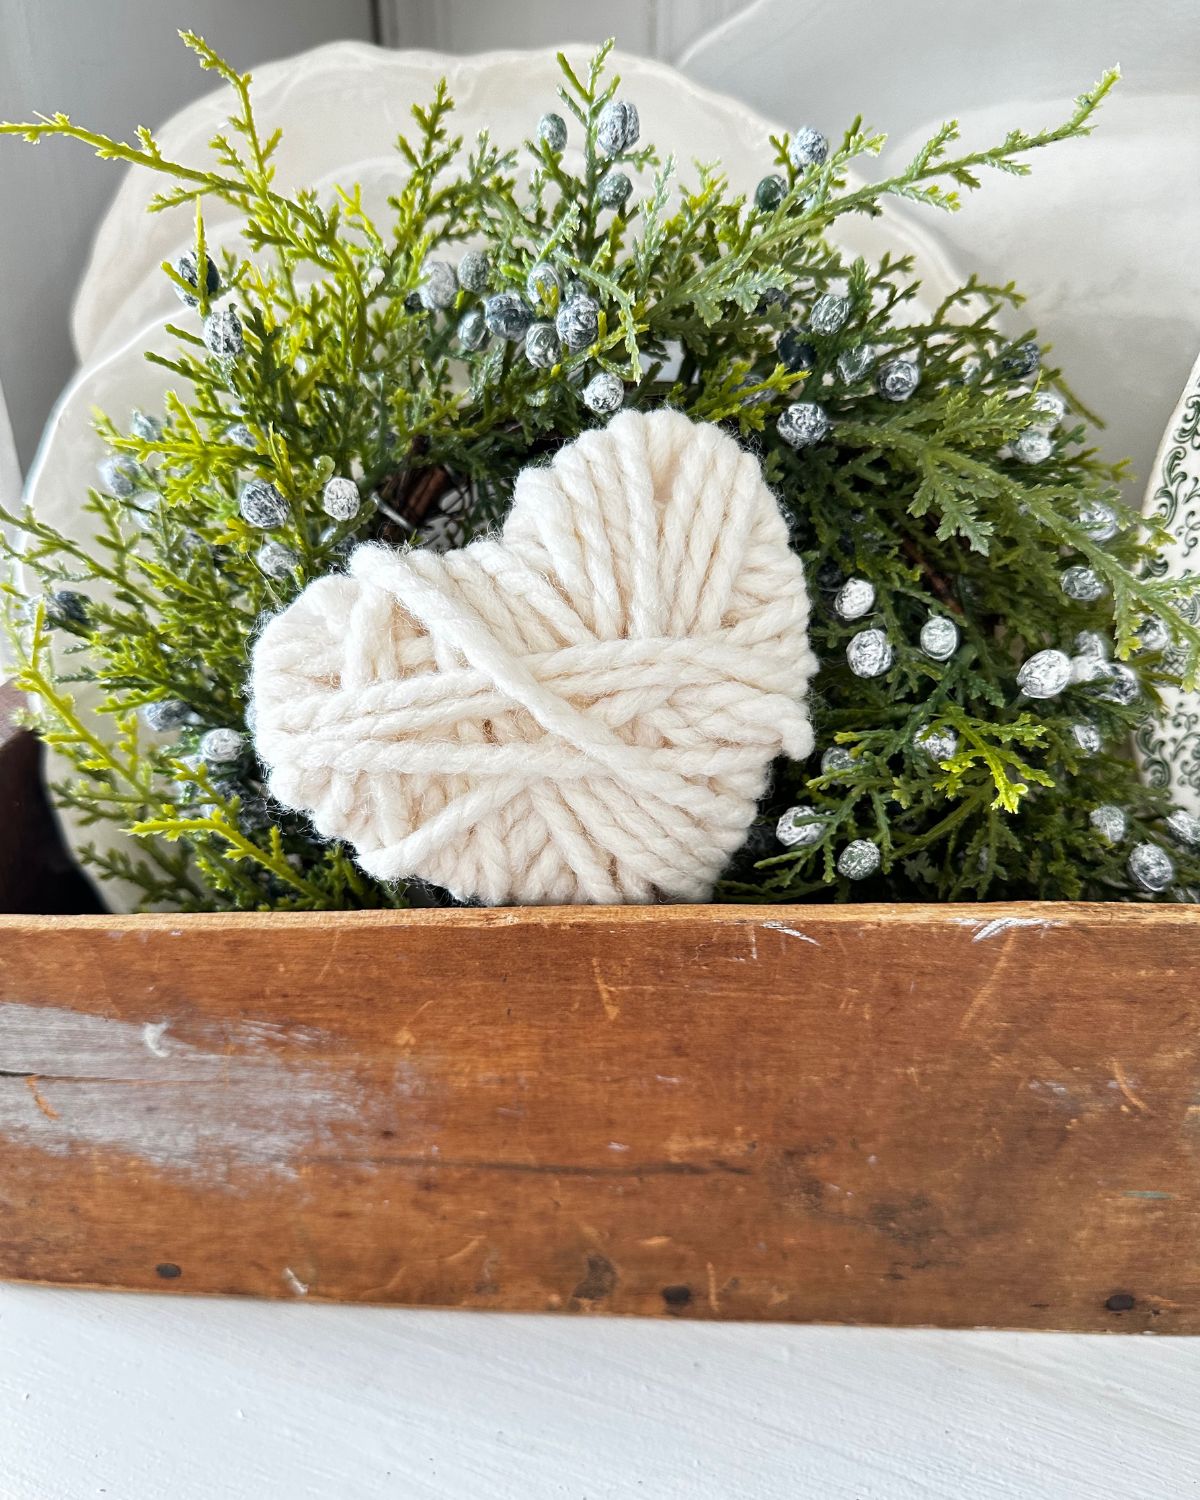 How to Make Yarn-Wrapped Hearts